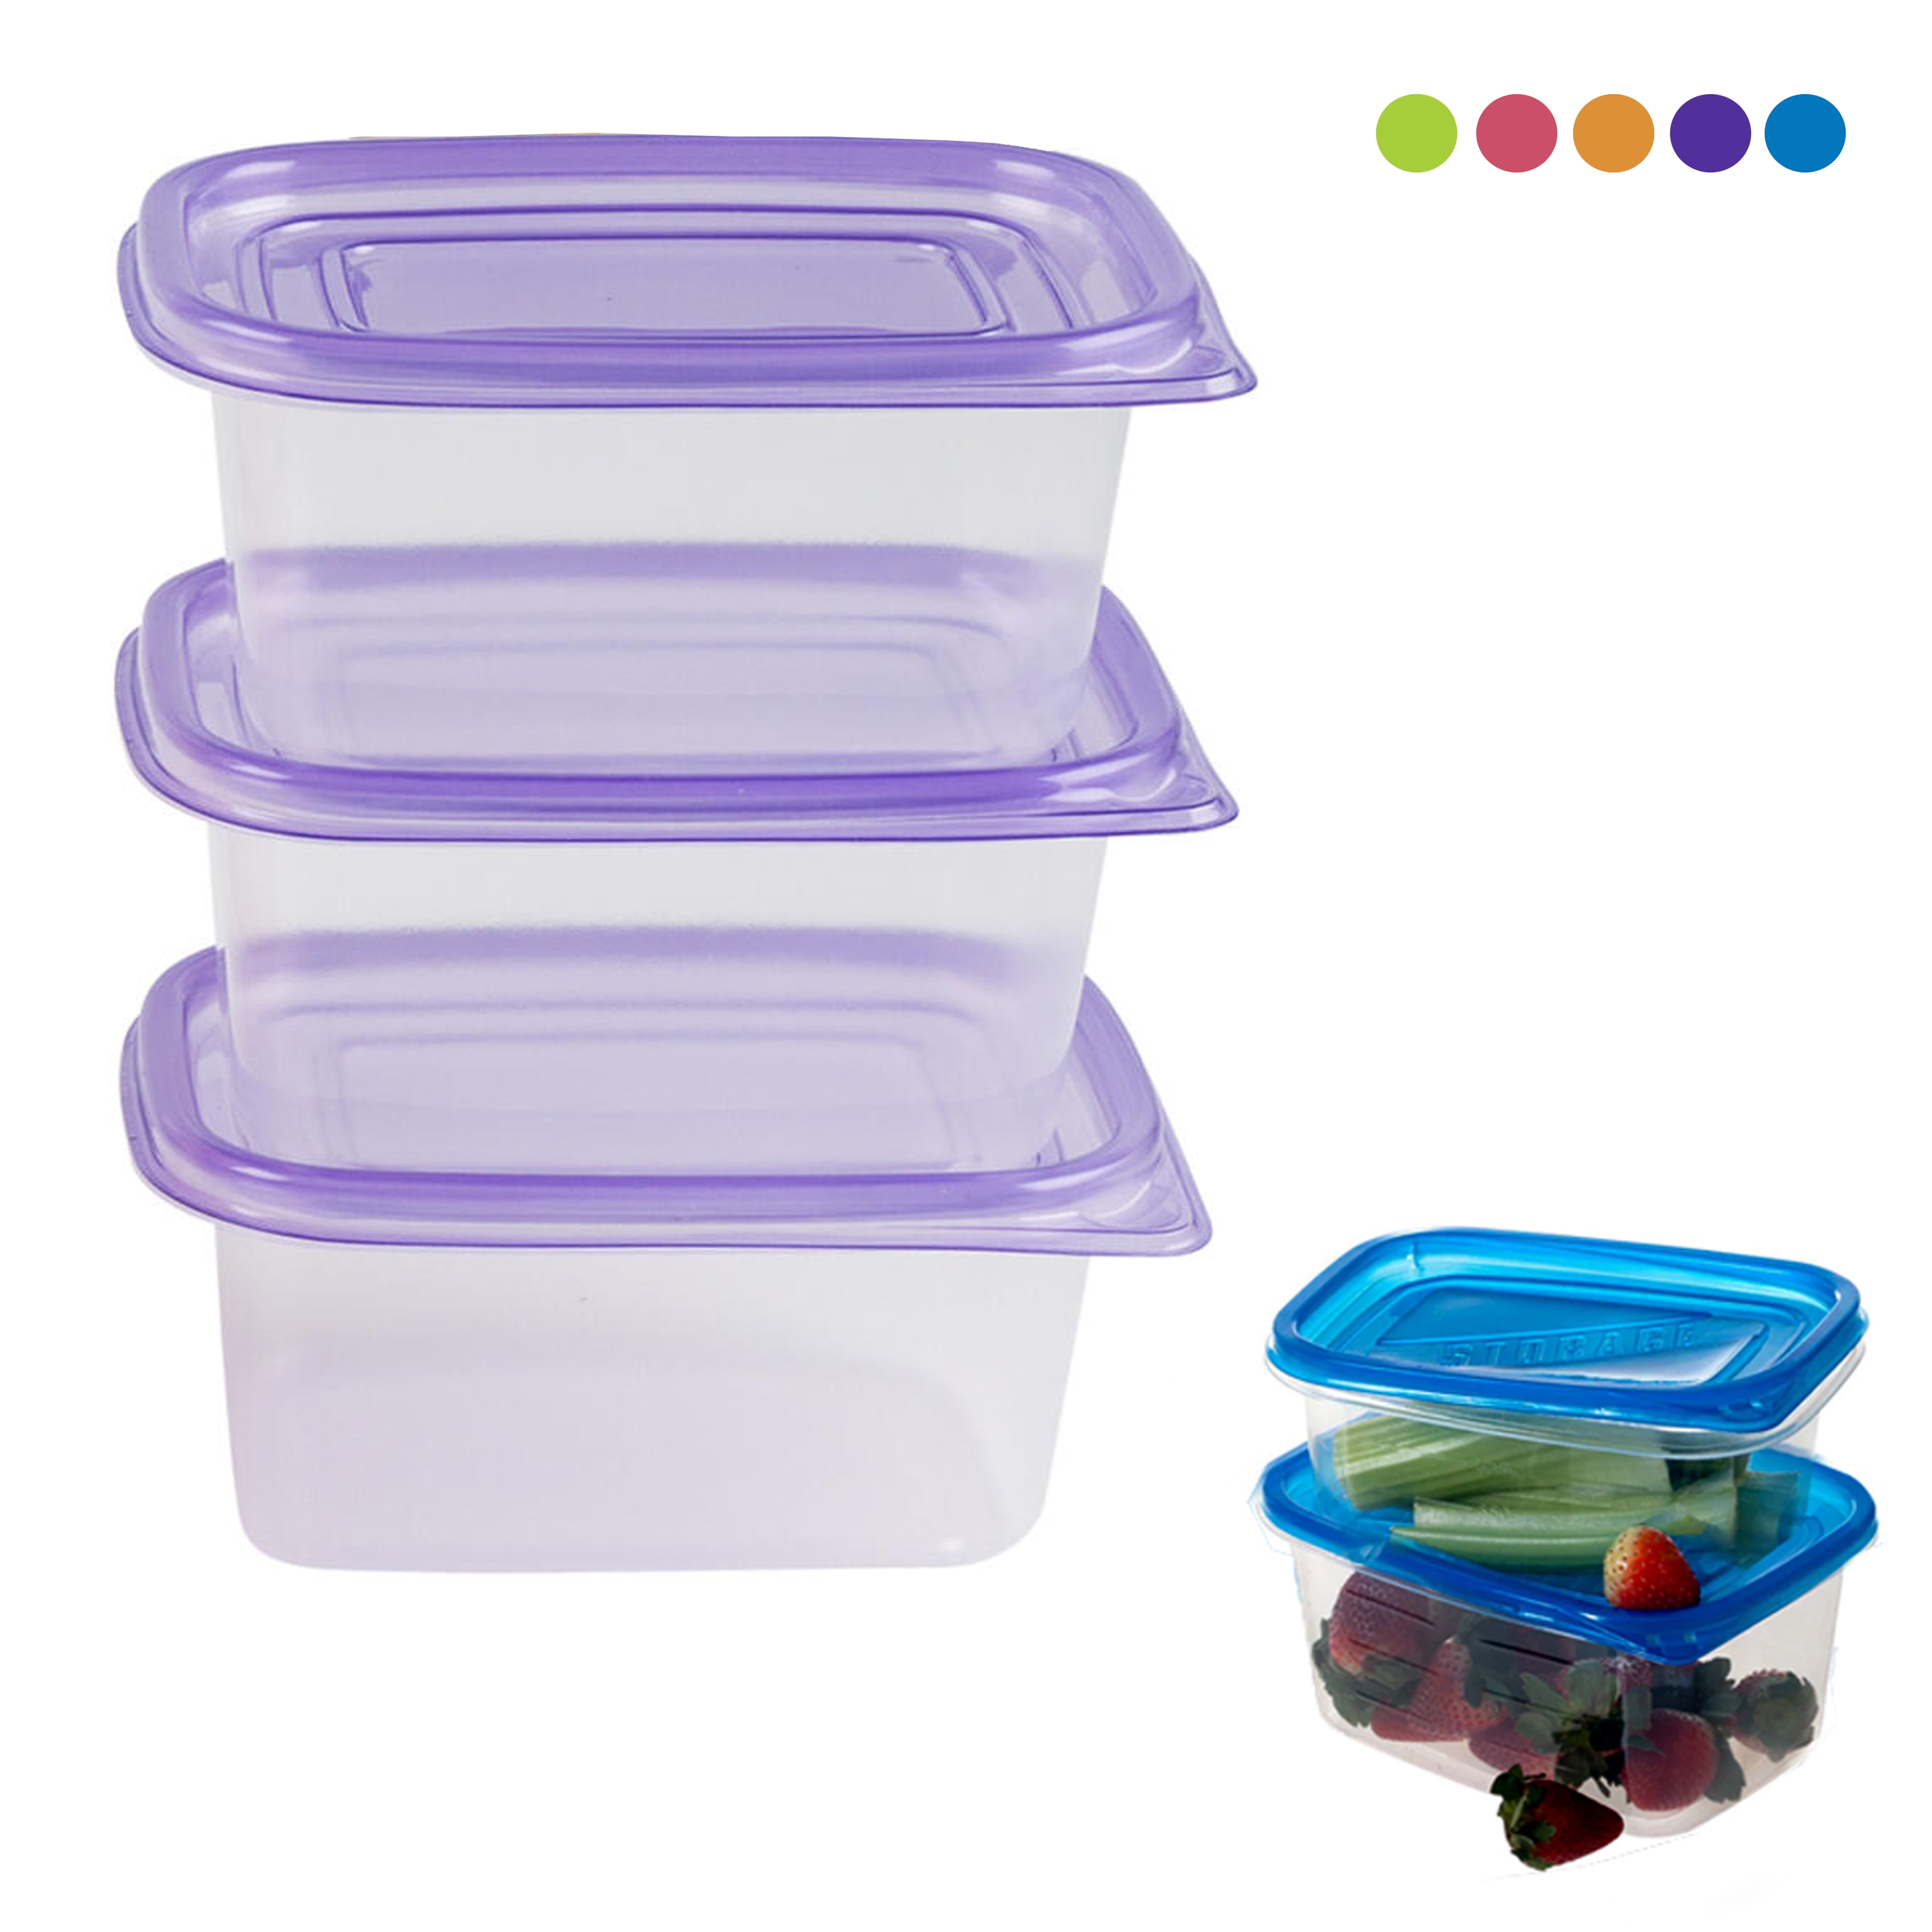 Bundle 2 Light Blue and Light Purple Sandwich and Snack Containers Frozen 2 Lunch Box Kit 